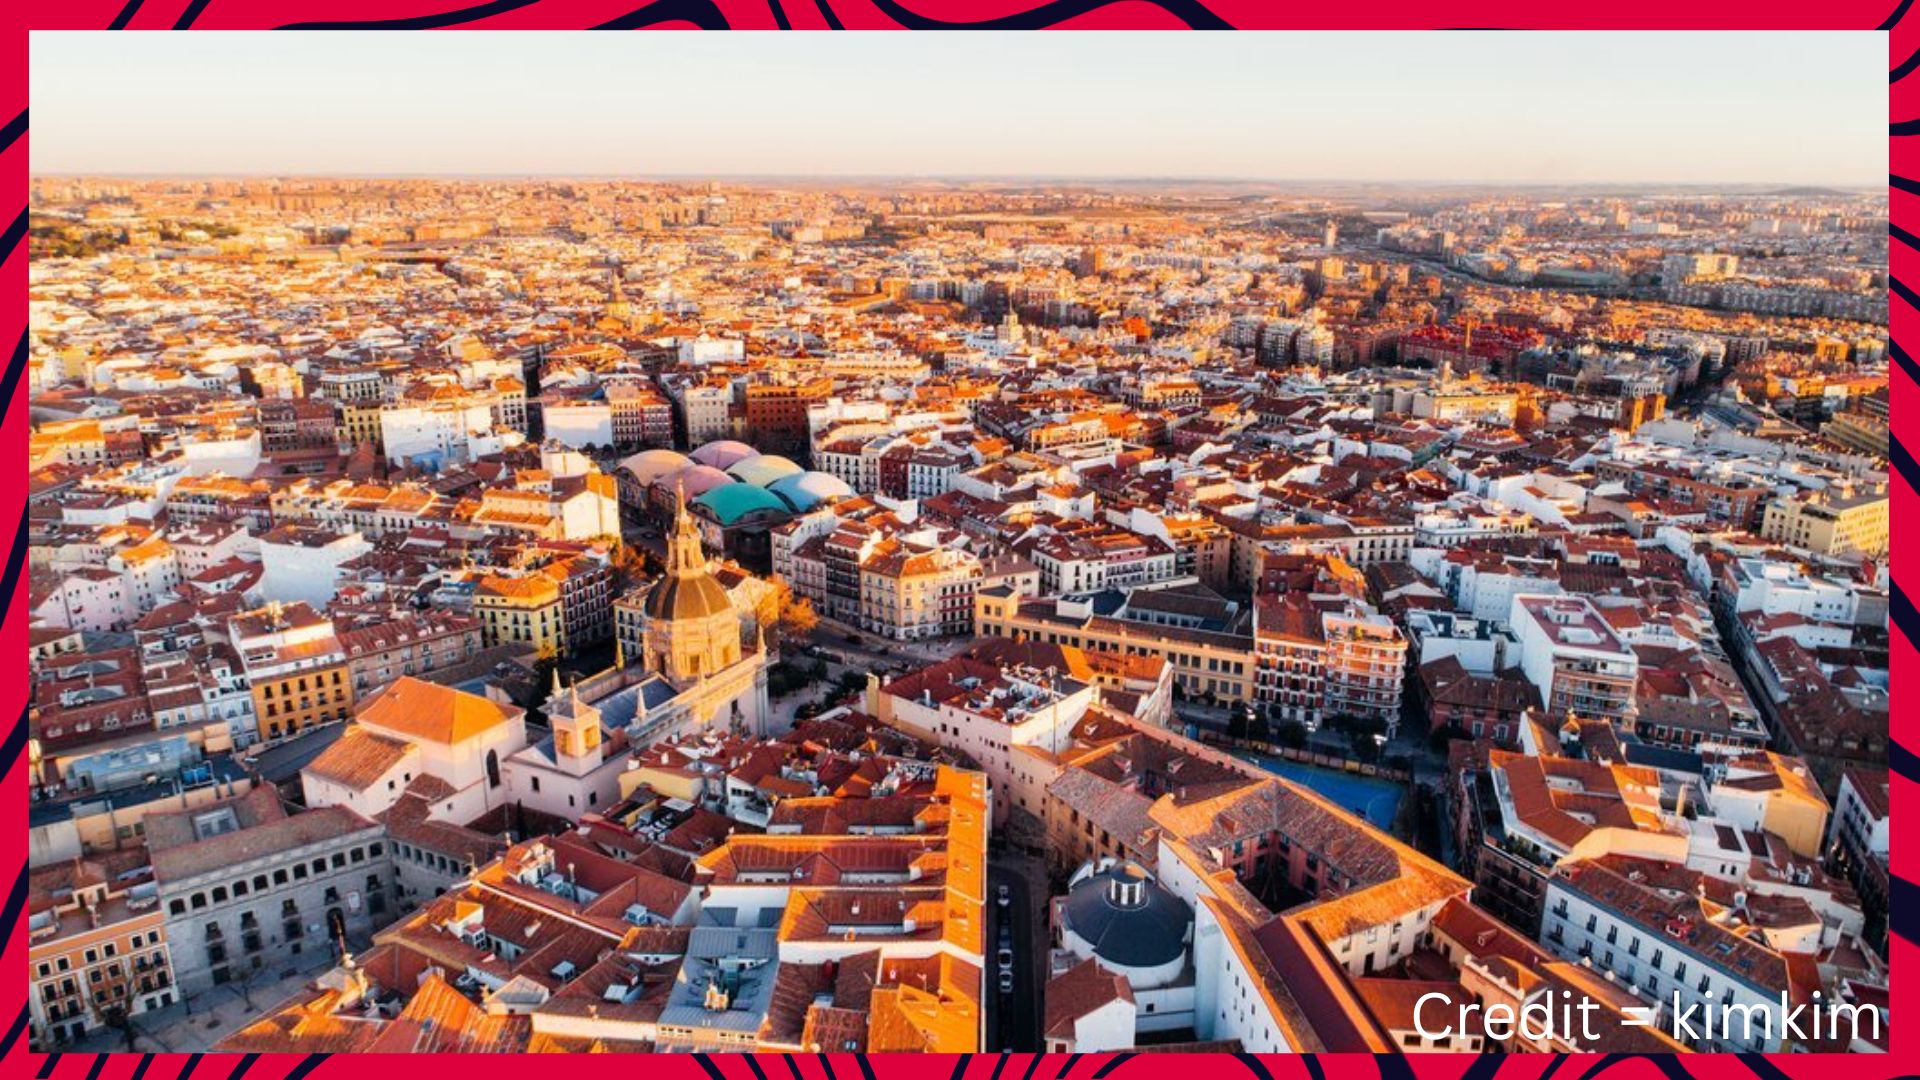 Madrid is the 3rd most popular city in Europe.